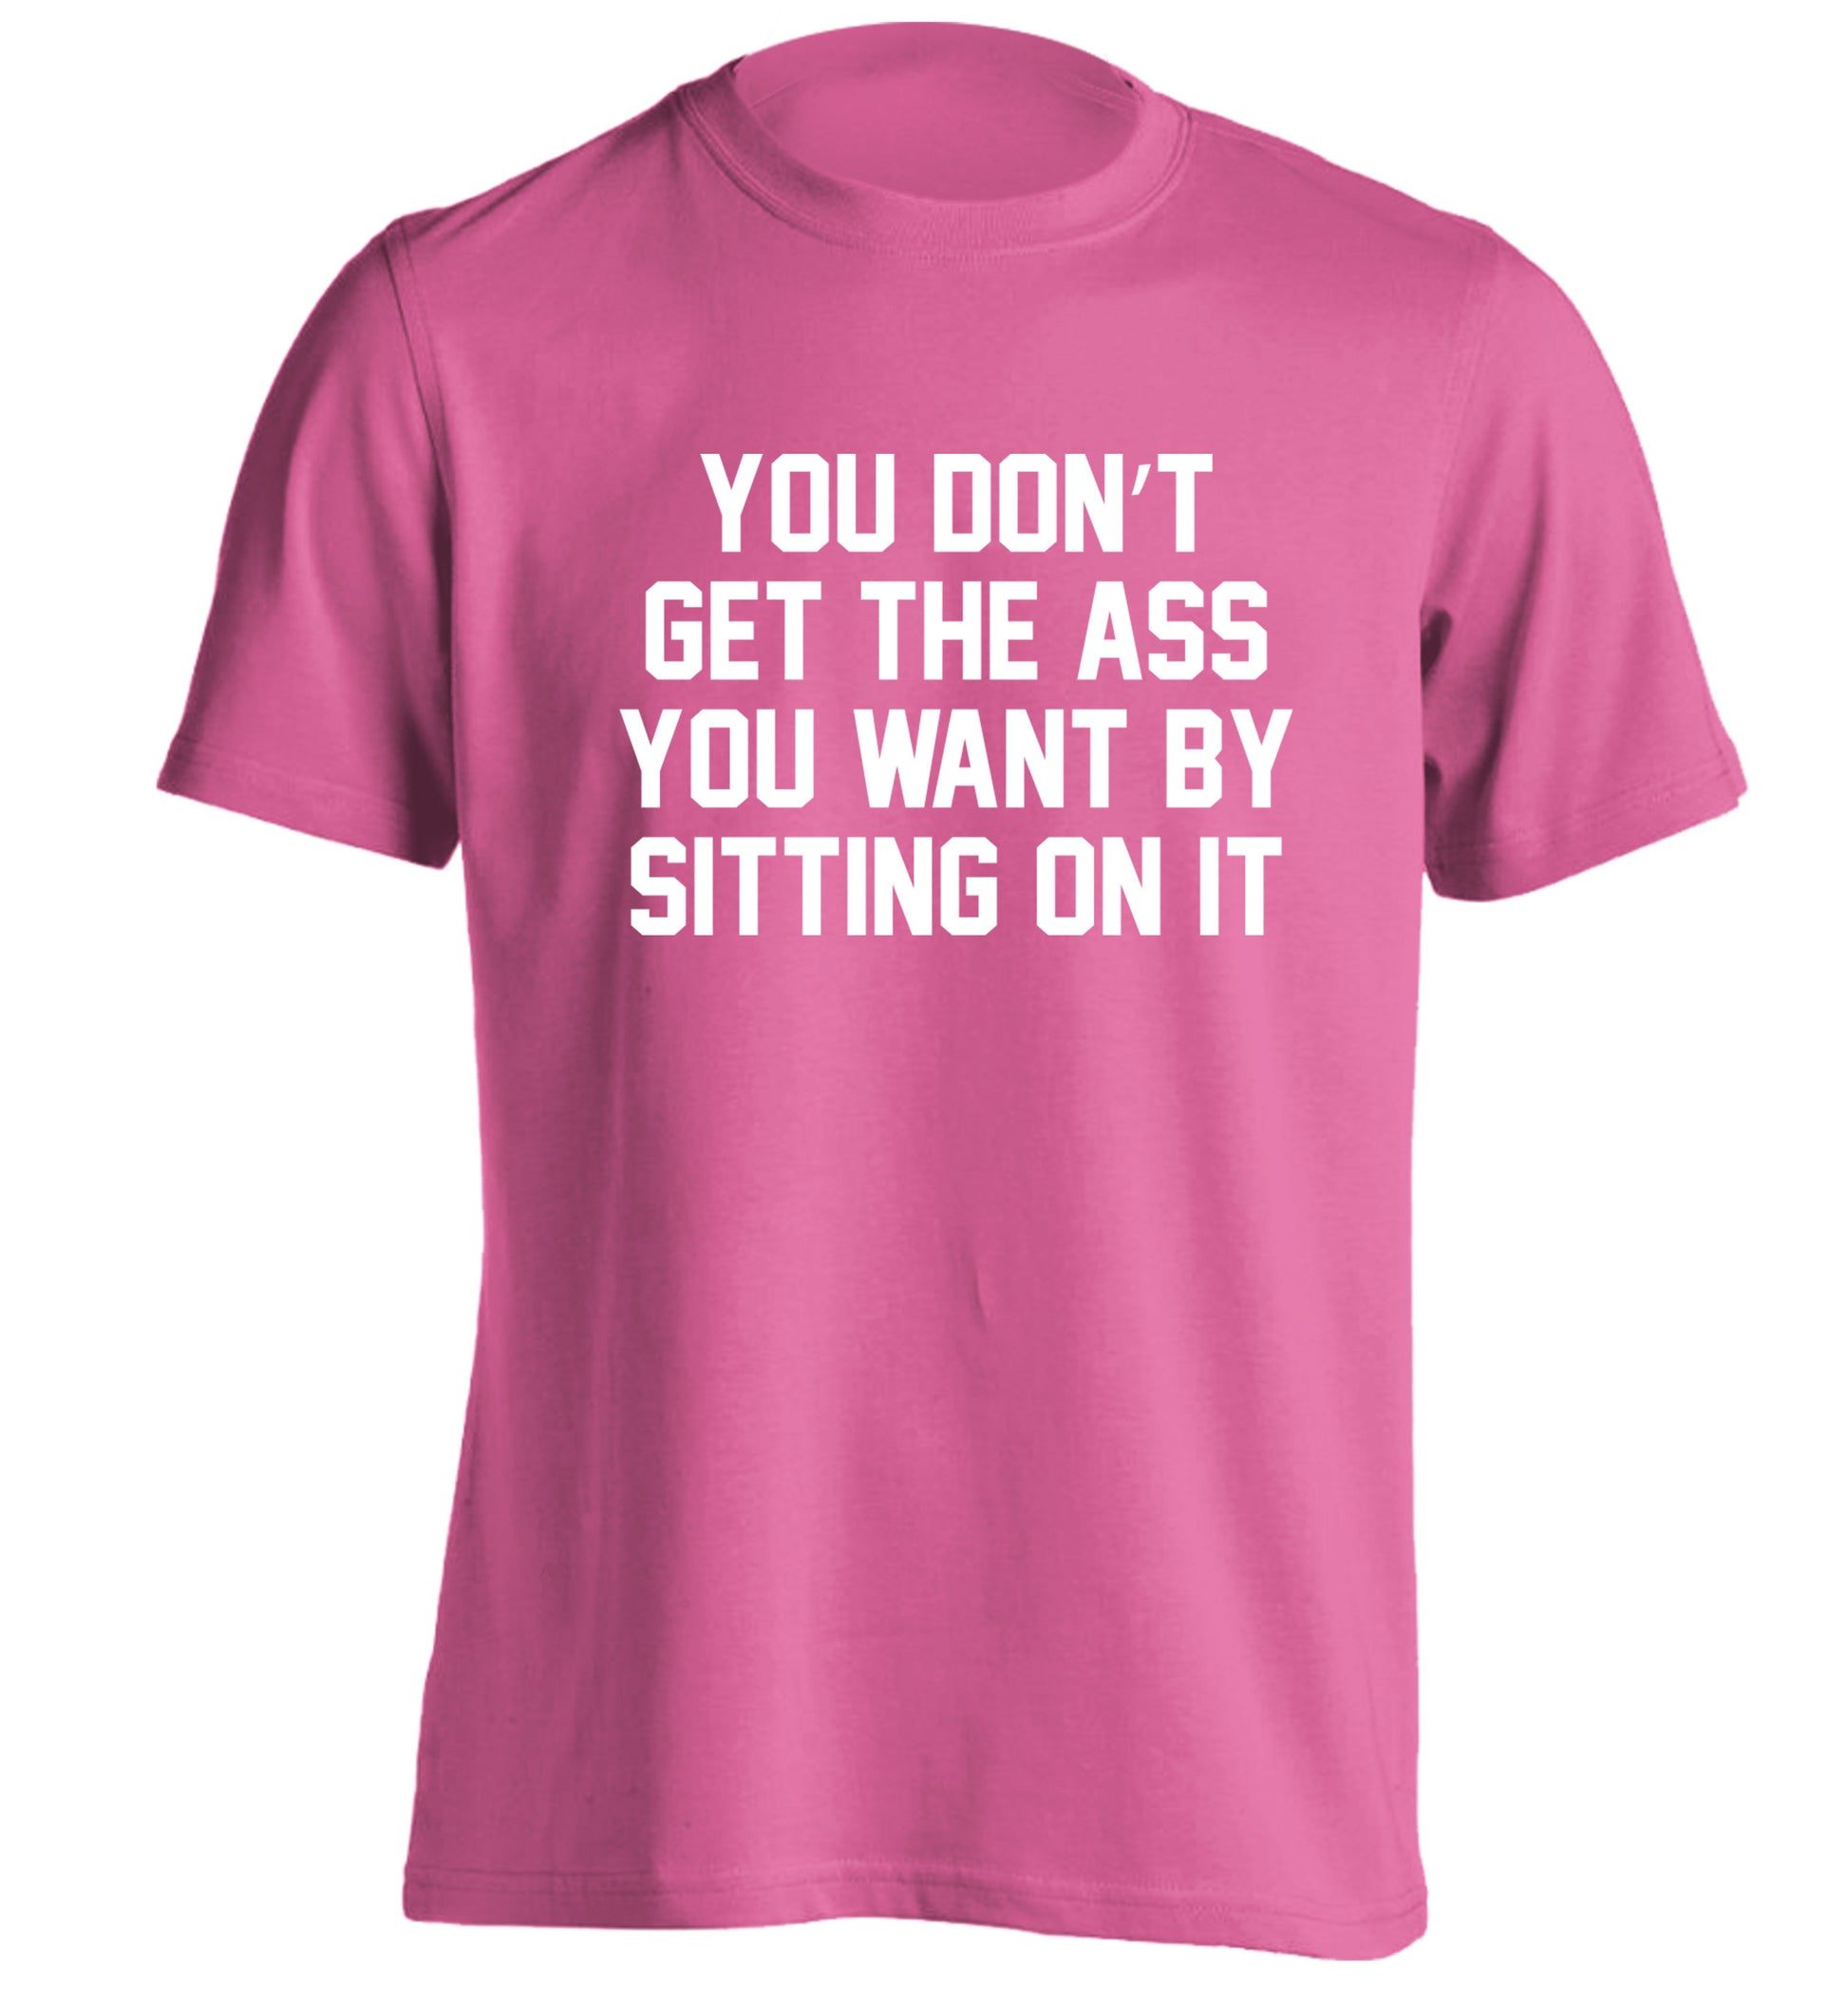 You don't get the ass you want by sitting on it adults unisex pink Tshirt 2XL